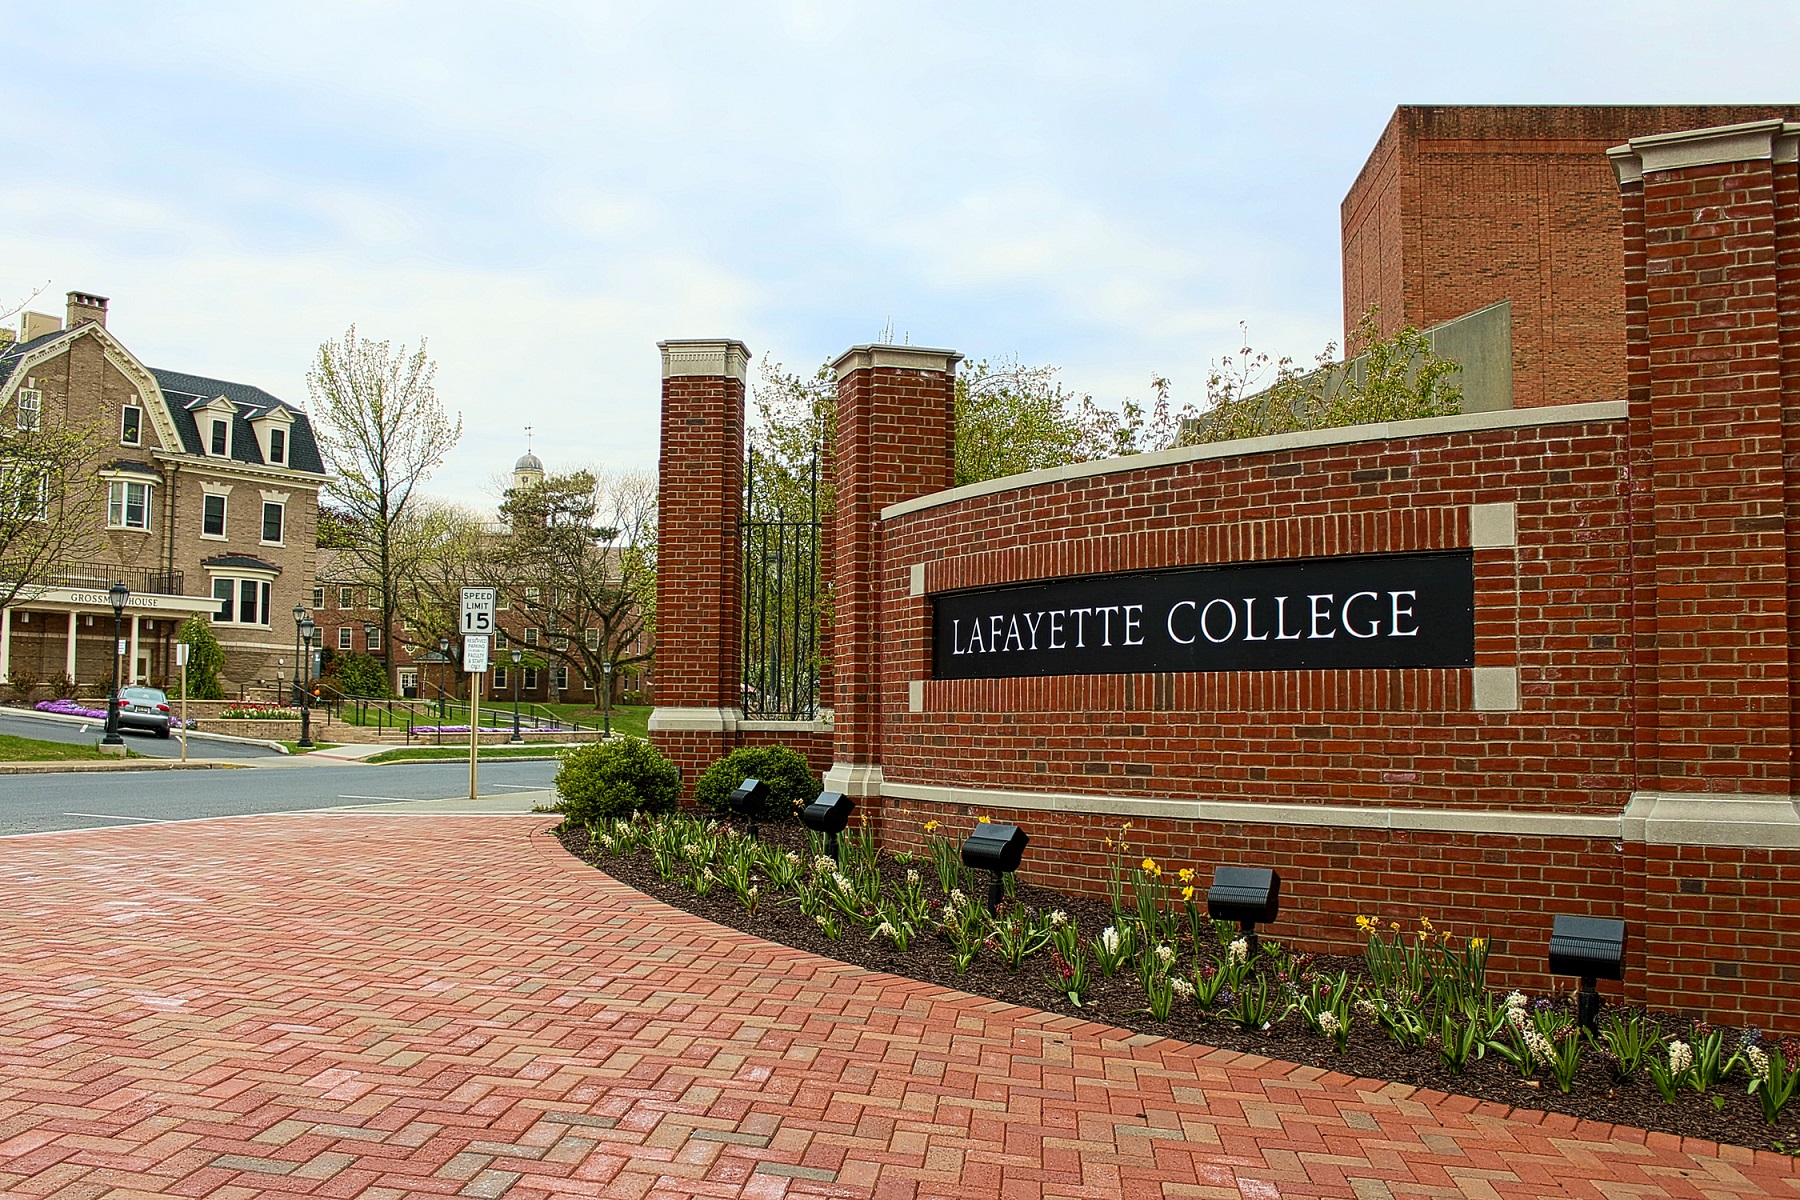 4 Things You Need to Do During Your Lafayette College Visit